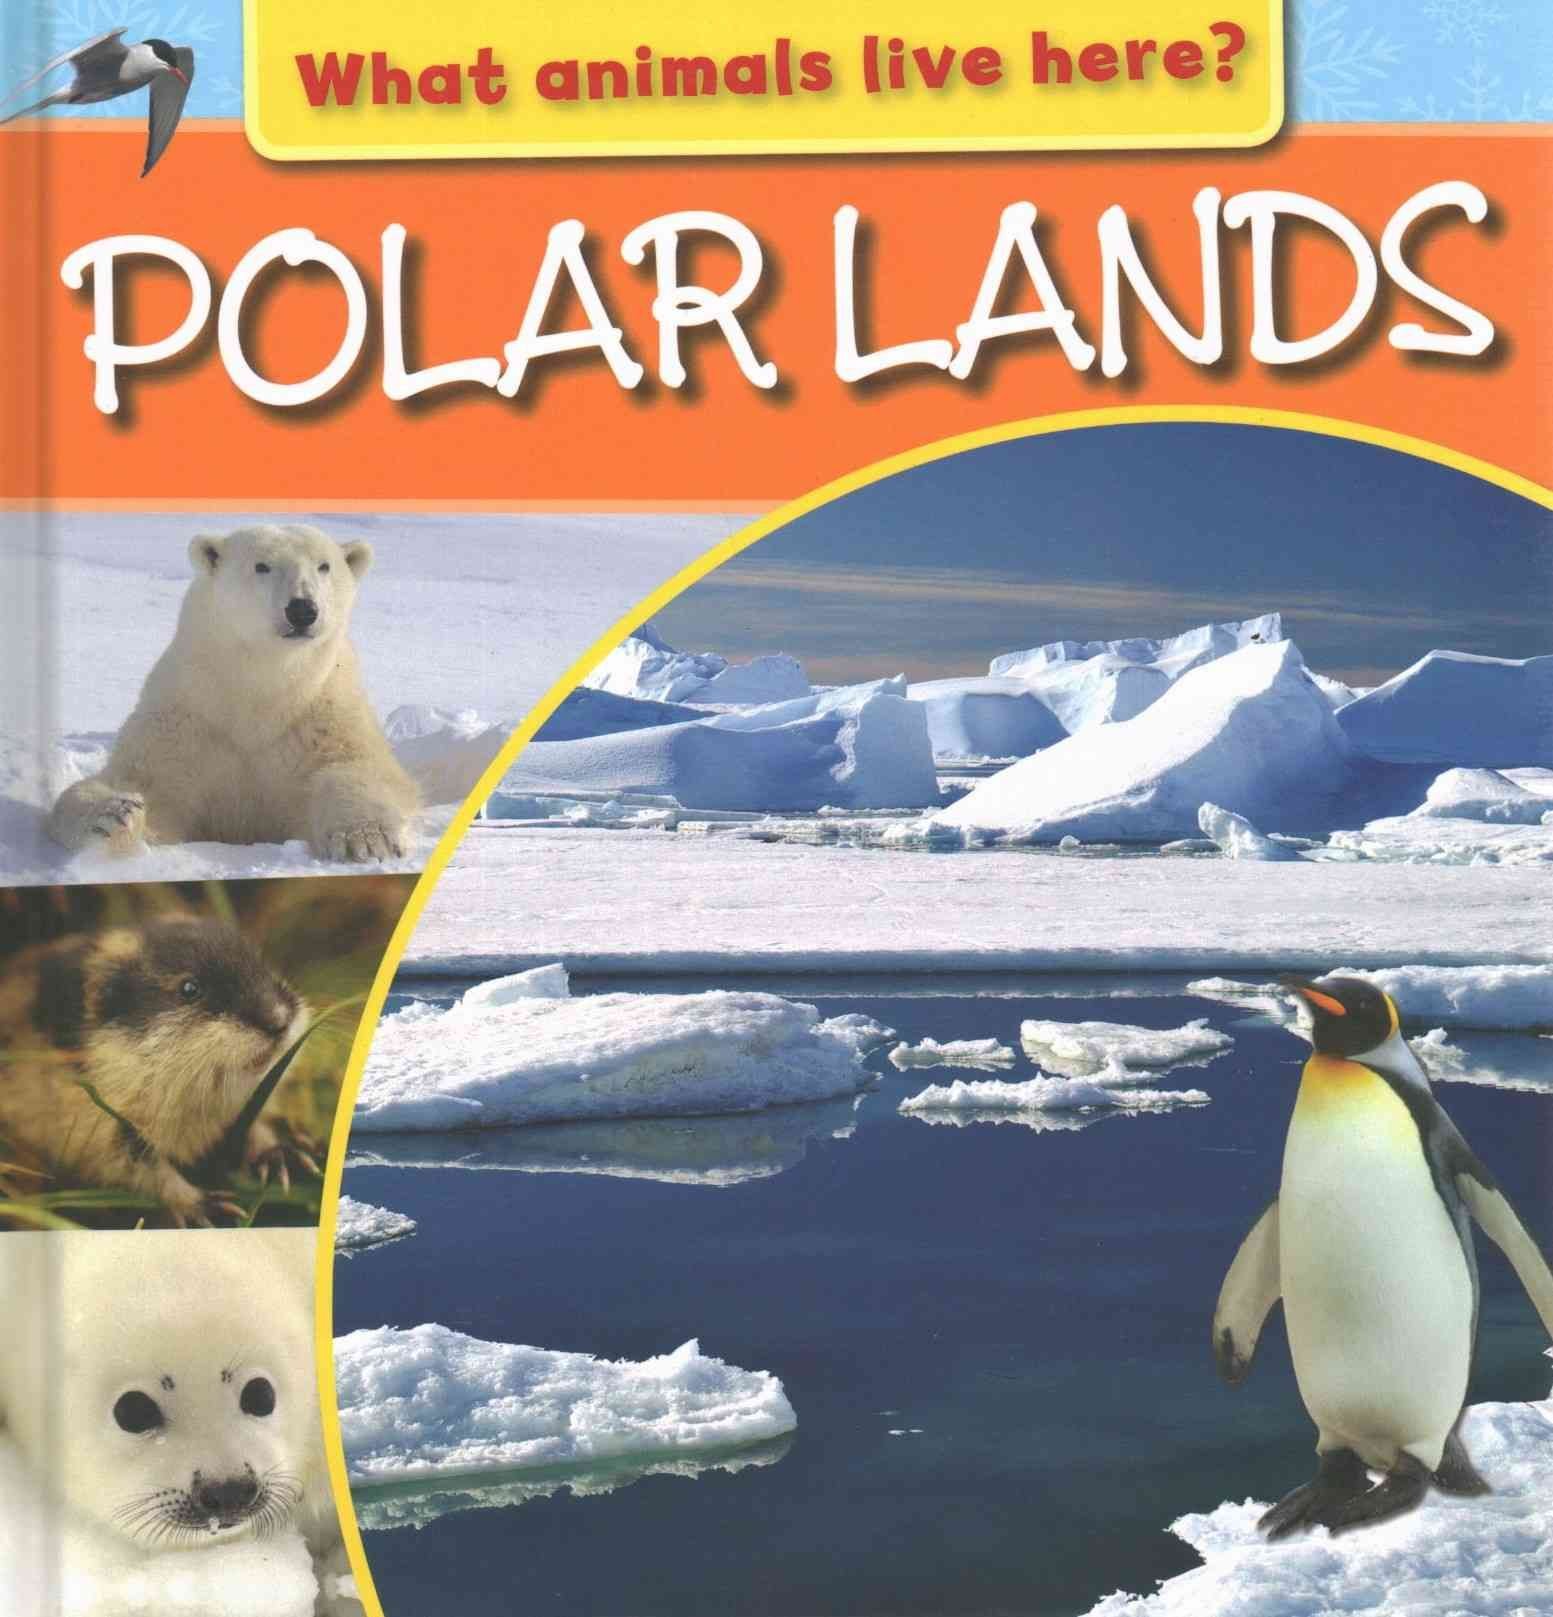 What Animals Live Here?: Polar Lands